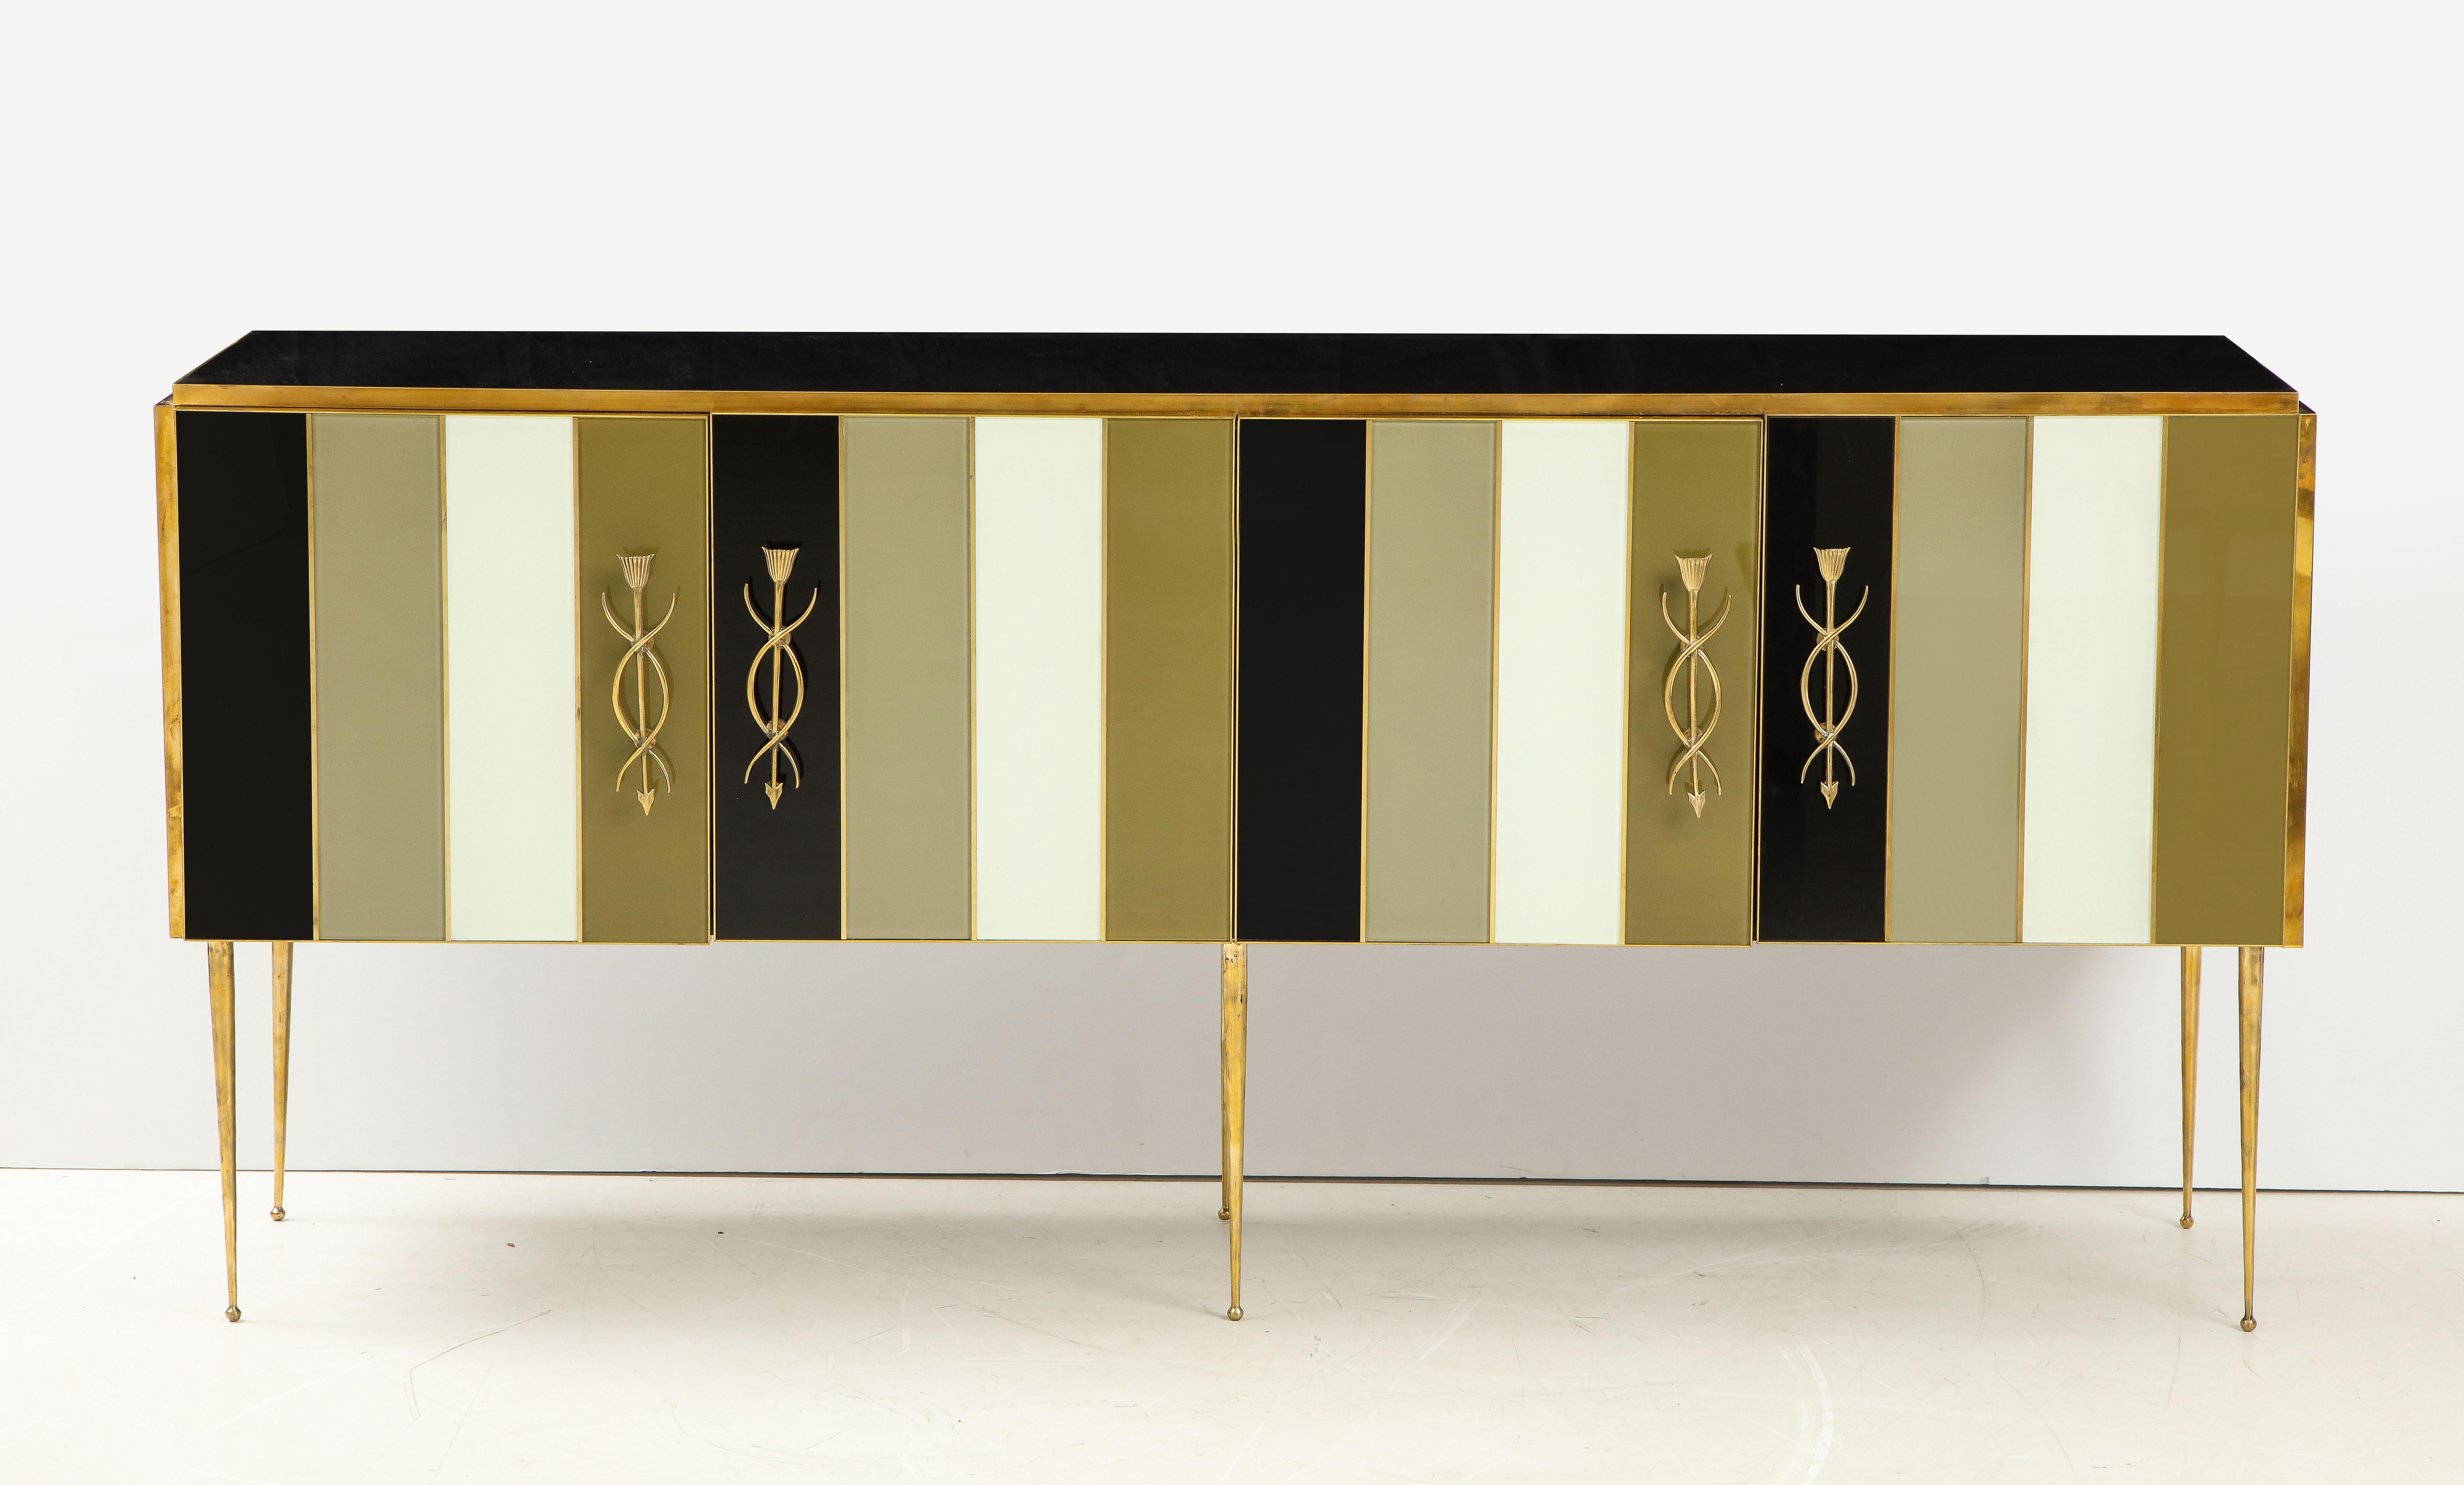 One of a kind striped black, ivory and taupe/sage green tinted glass sideboard or credenza with brass inlays handmade in Italy by a master artisan and artist. Wooden frame is veneered with tinted glass panels in alternating colors of black, ivory,